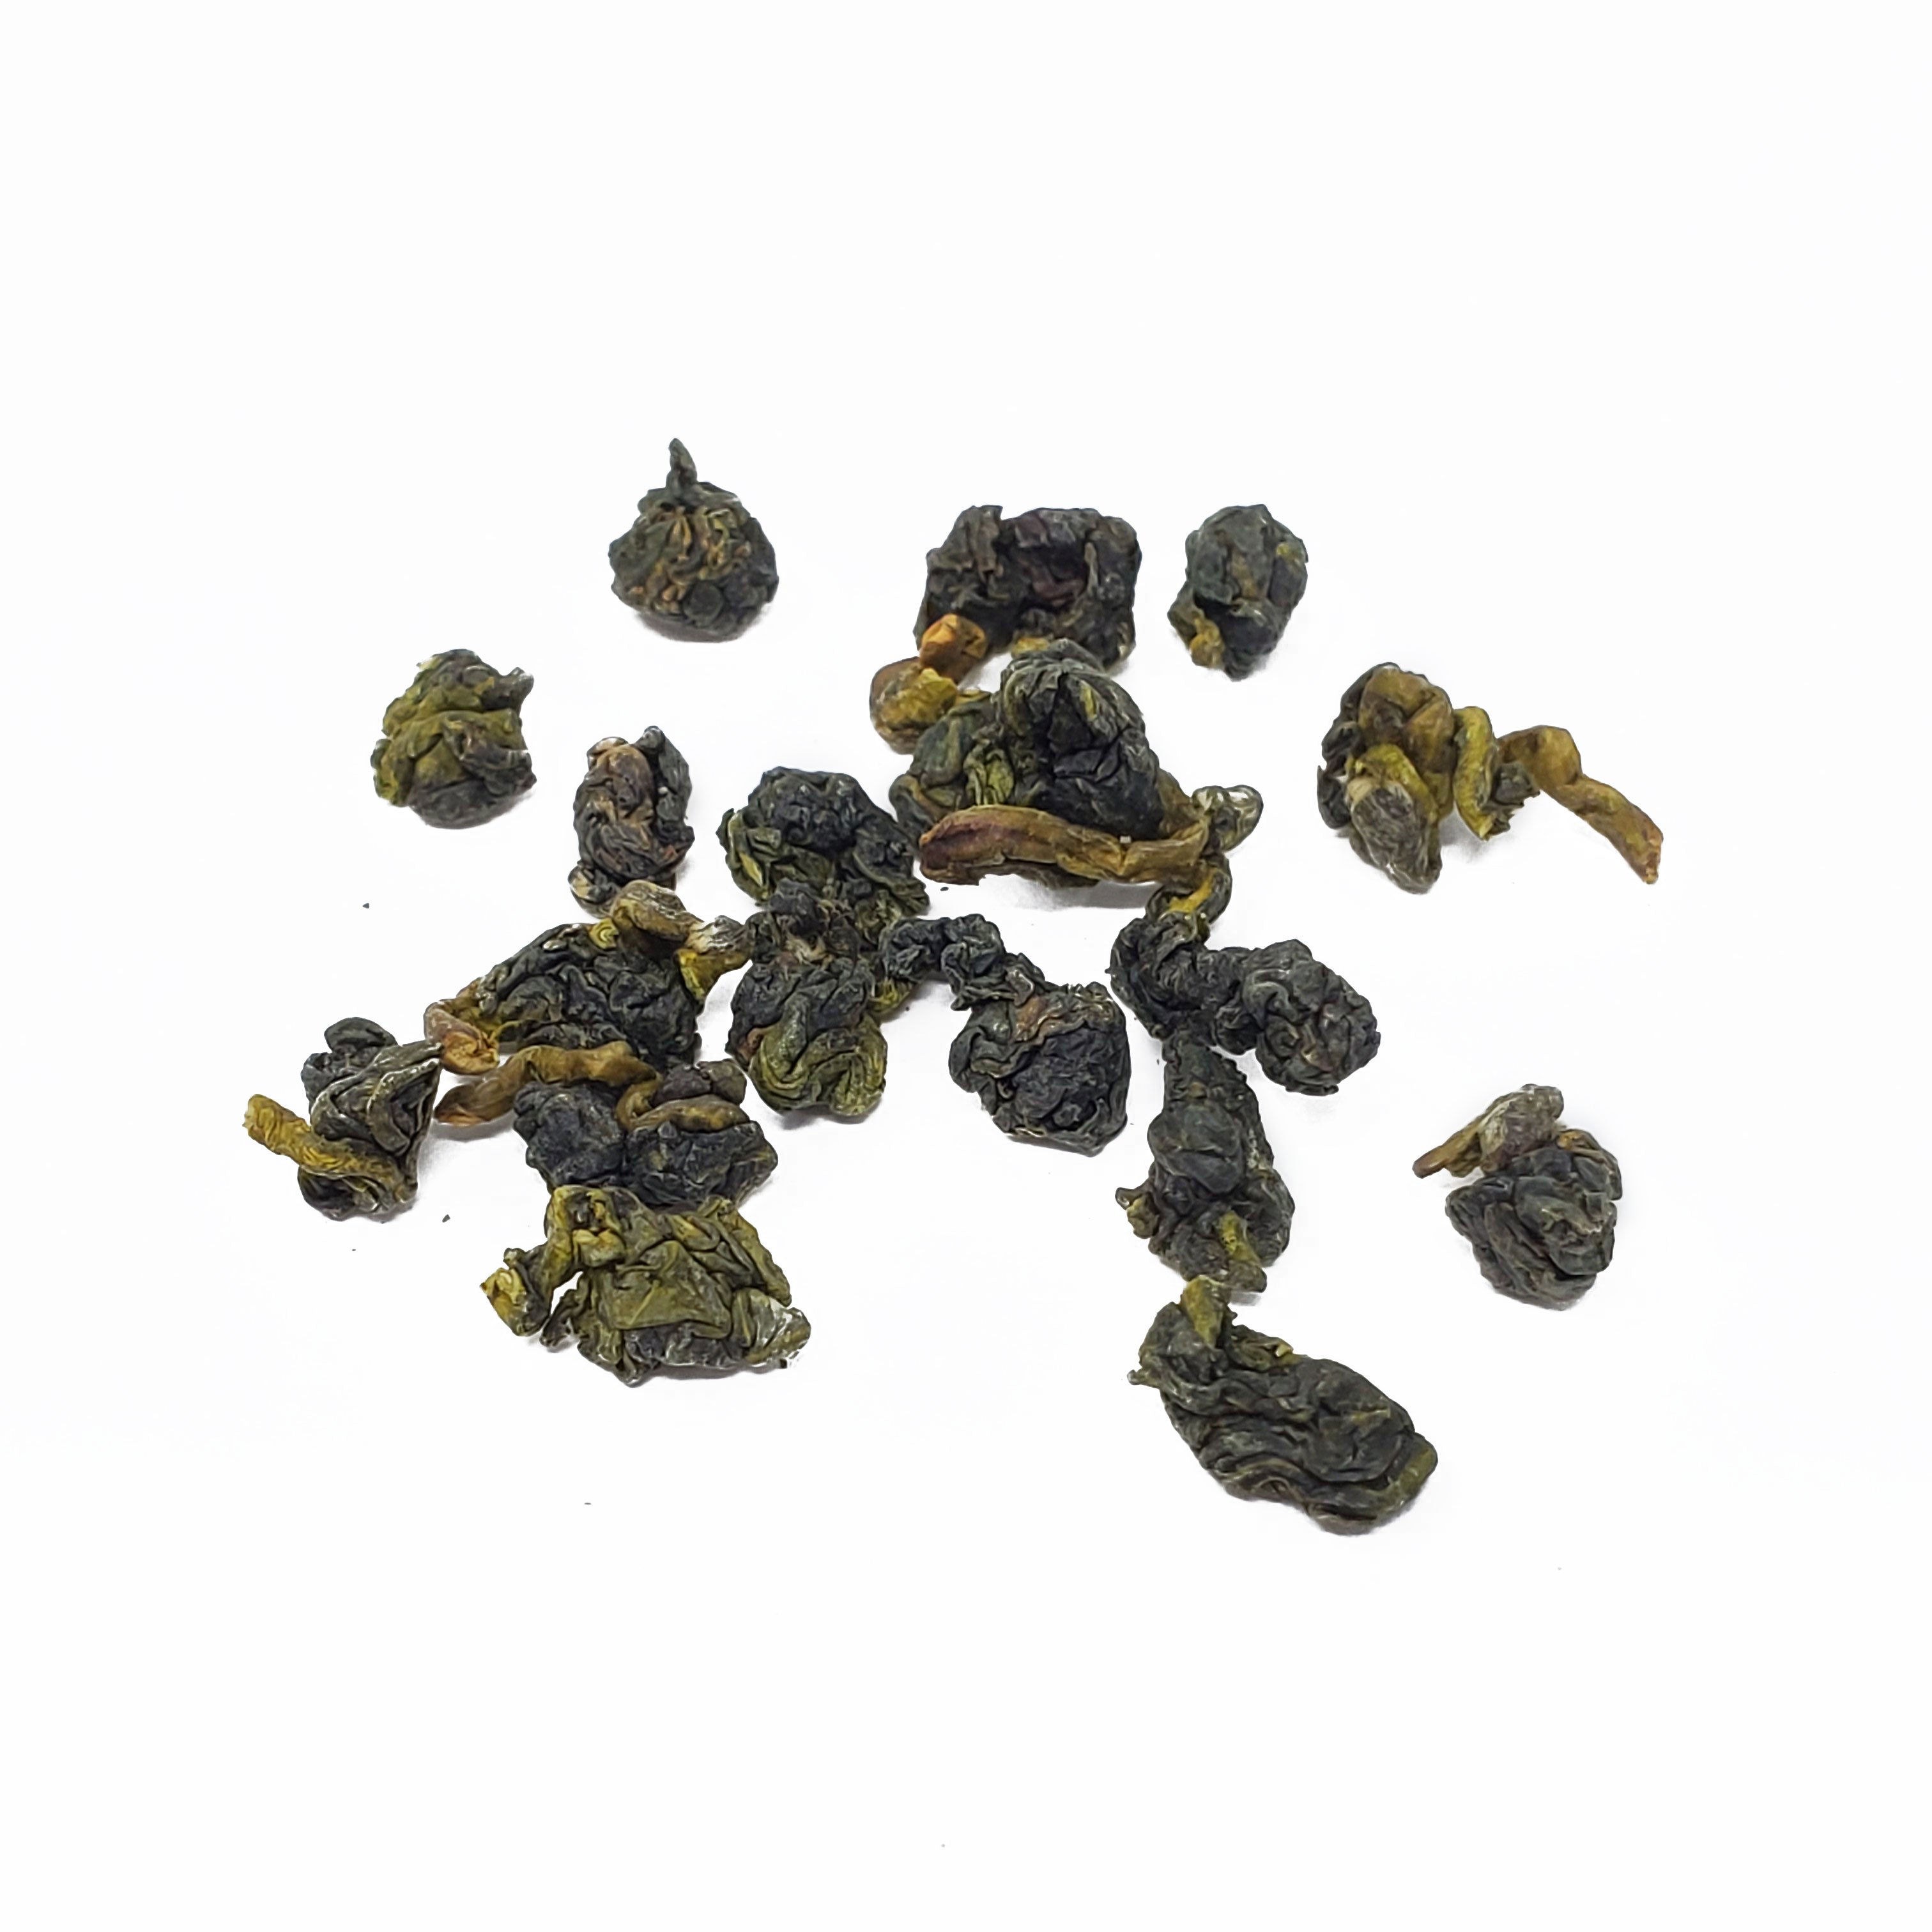  Taiwan Li Shan Oolong by Tea and Whisk Tea and Whisk Perfumarie